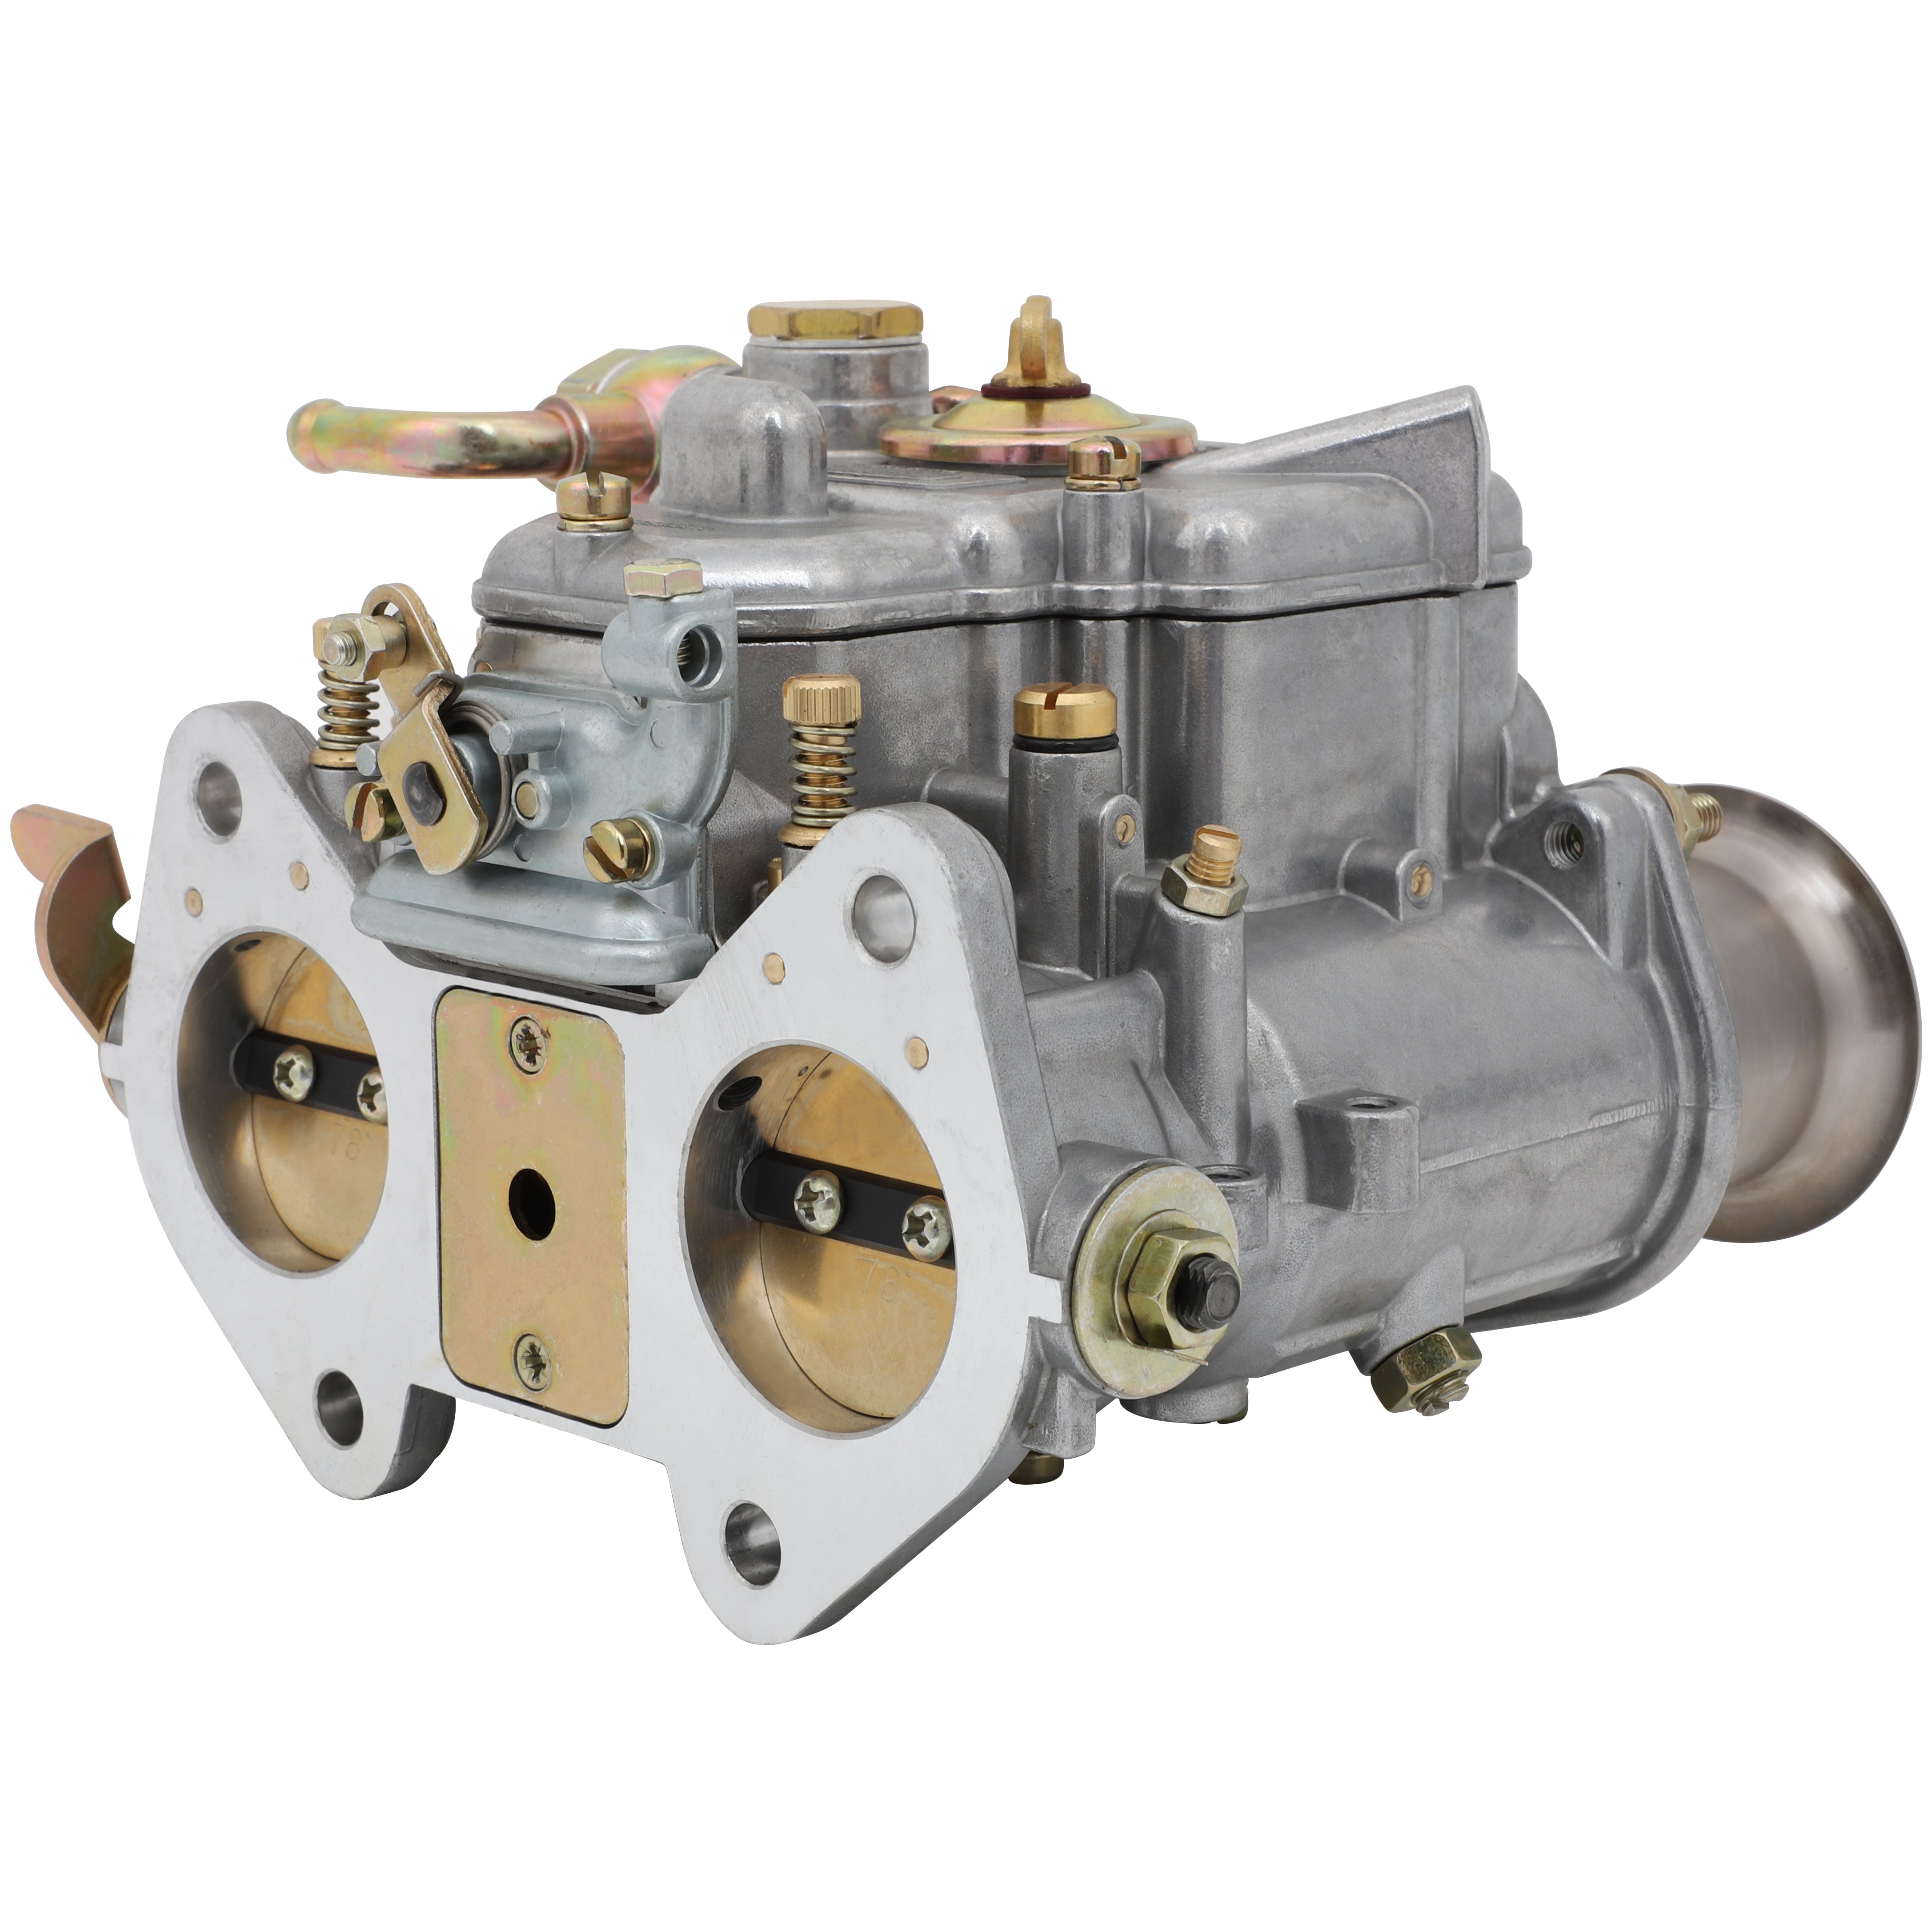 Carburetor Fit for 40 DCOE 40mm 19550.174 Carb 4 cyl 6 Cyl V8 Fit for VW and Many Toyota Nissan GM Engines 